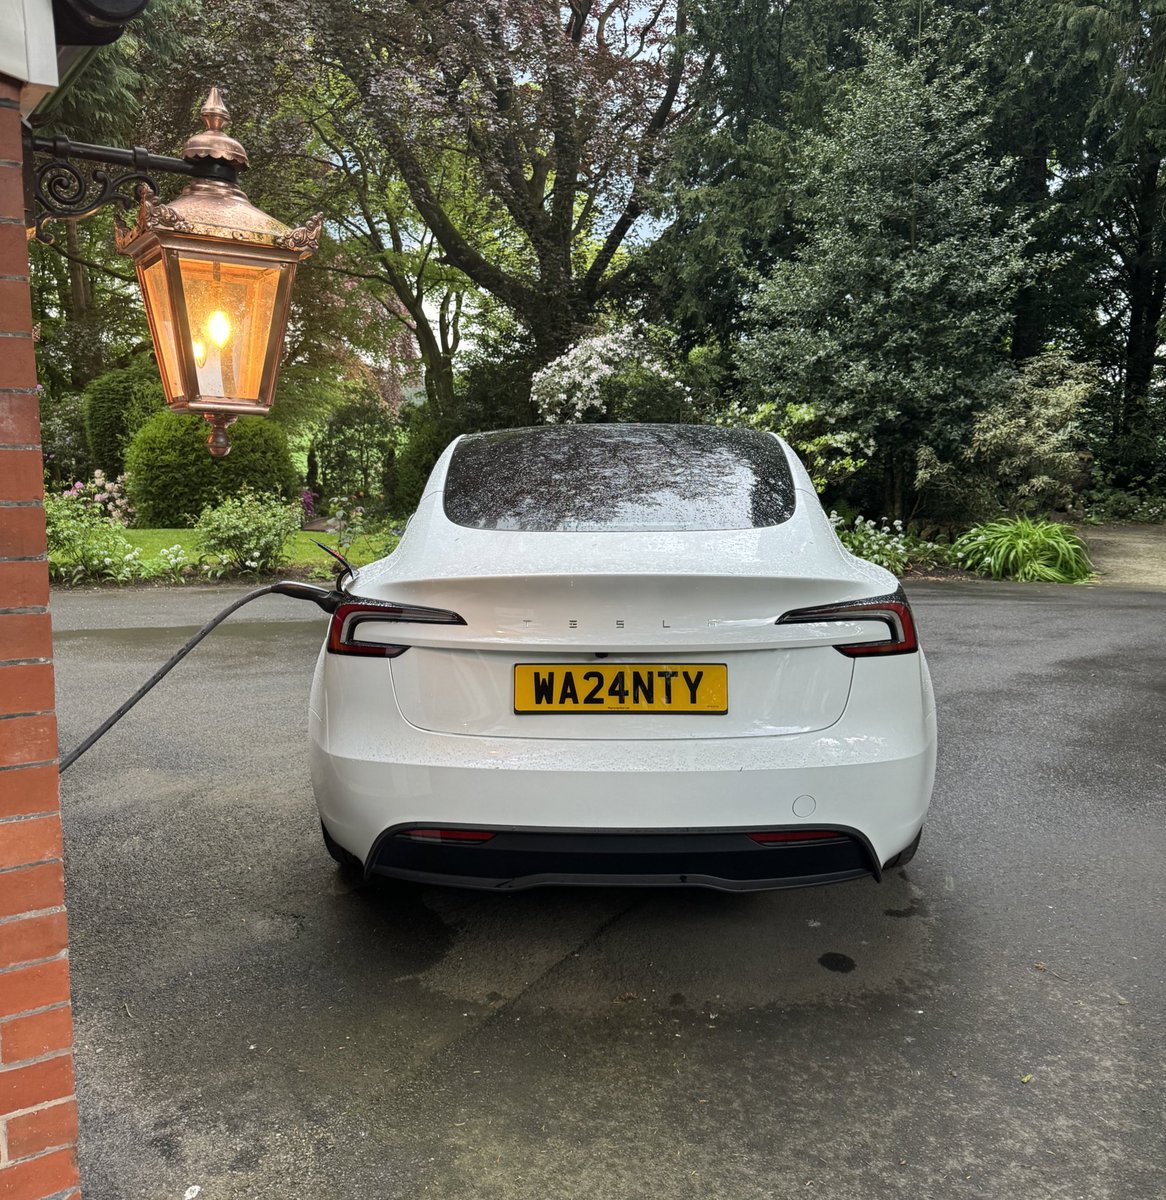 One of my company directors asked to borrow my diesel Range Rover this weekend because he was going to watch the football down in Tottenham. The reason - he would have to stop to charge 3 times in his Model 3 Tesla. 😂🤪